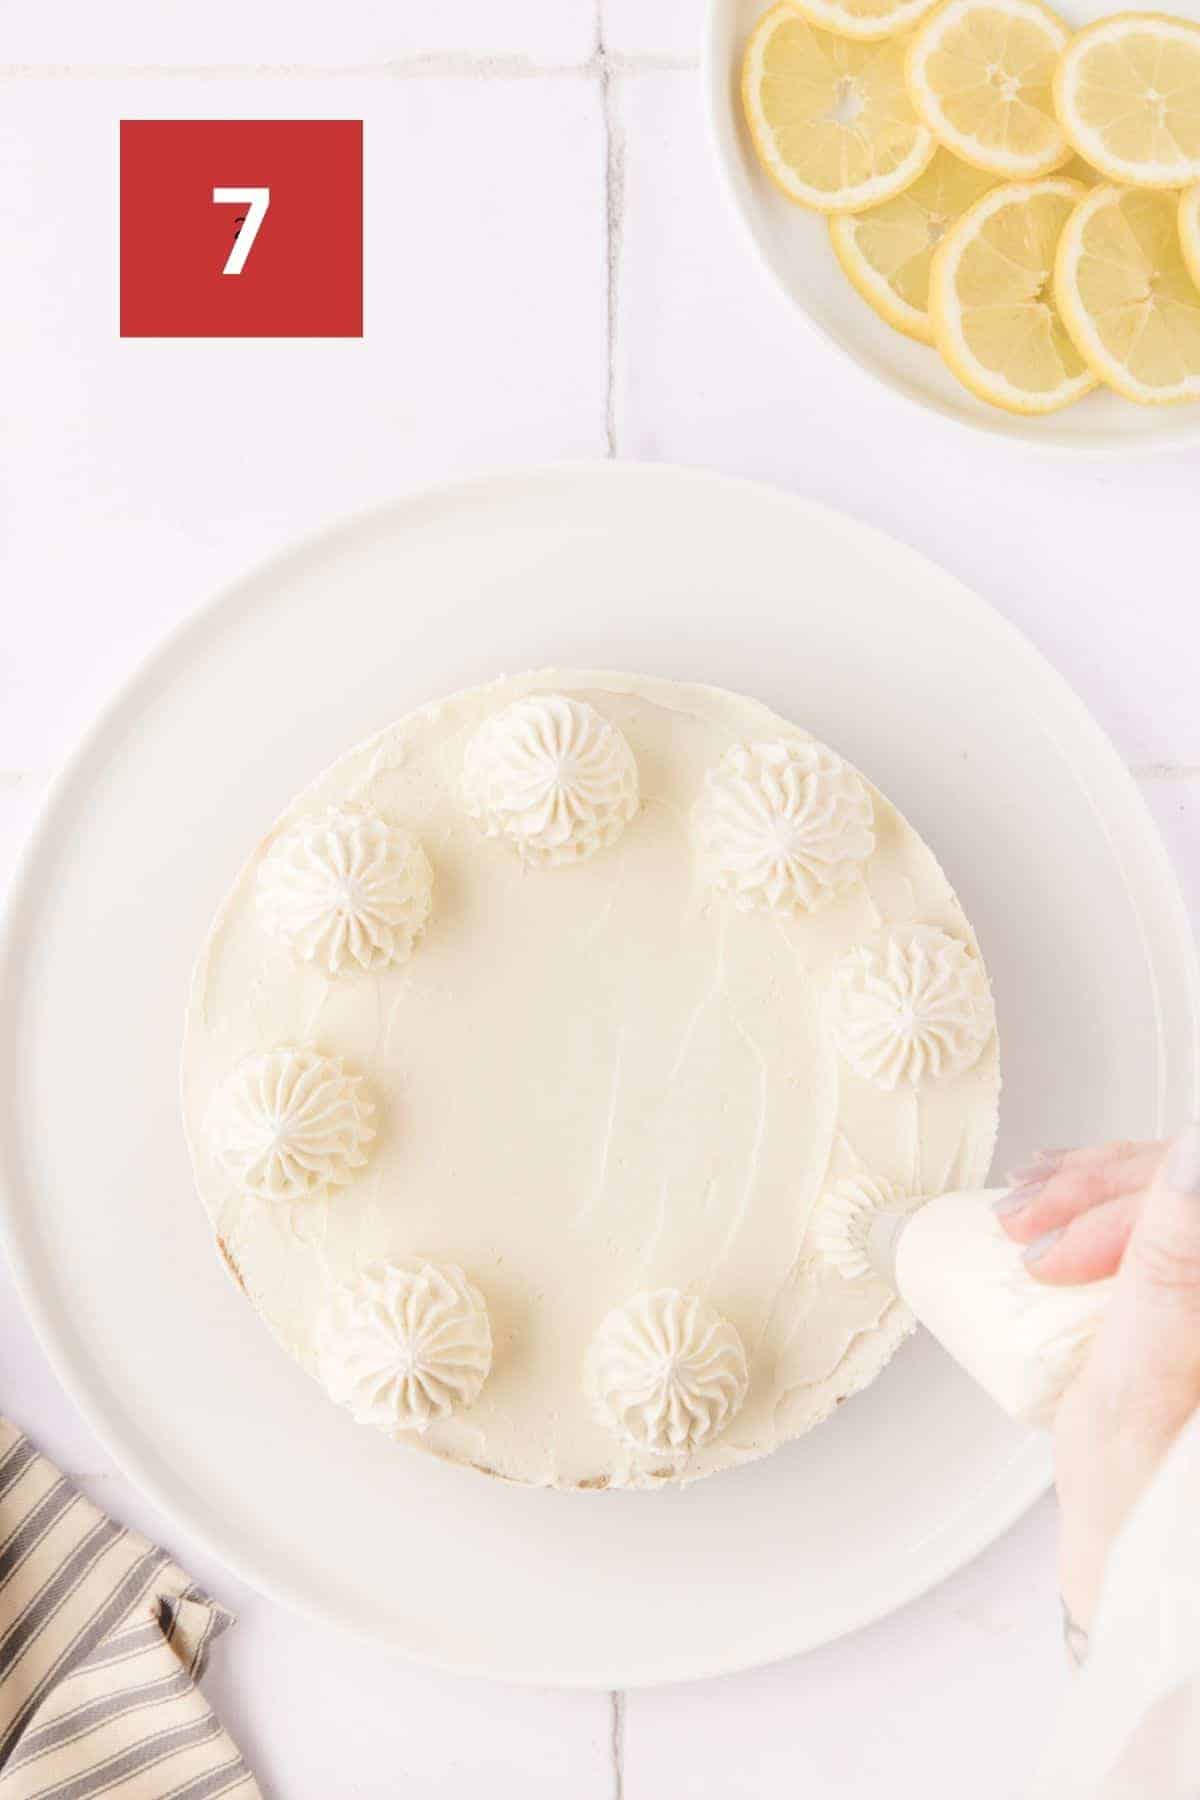 A no bake lemon cheesecake with whip cream being piped on top. The lemon cheesecake sits on a white platter on a white tile background. In the upper left corner is a dark red square with a white '7' in the center.